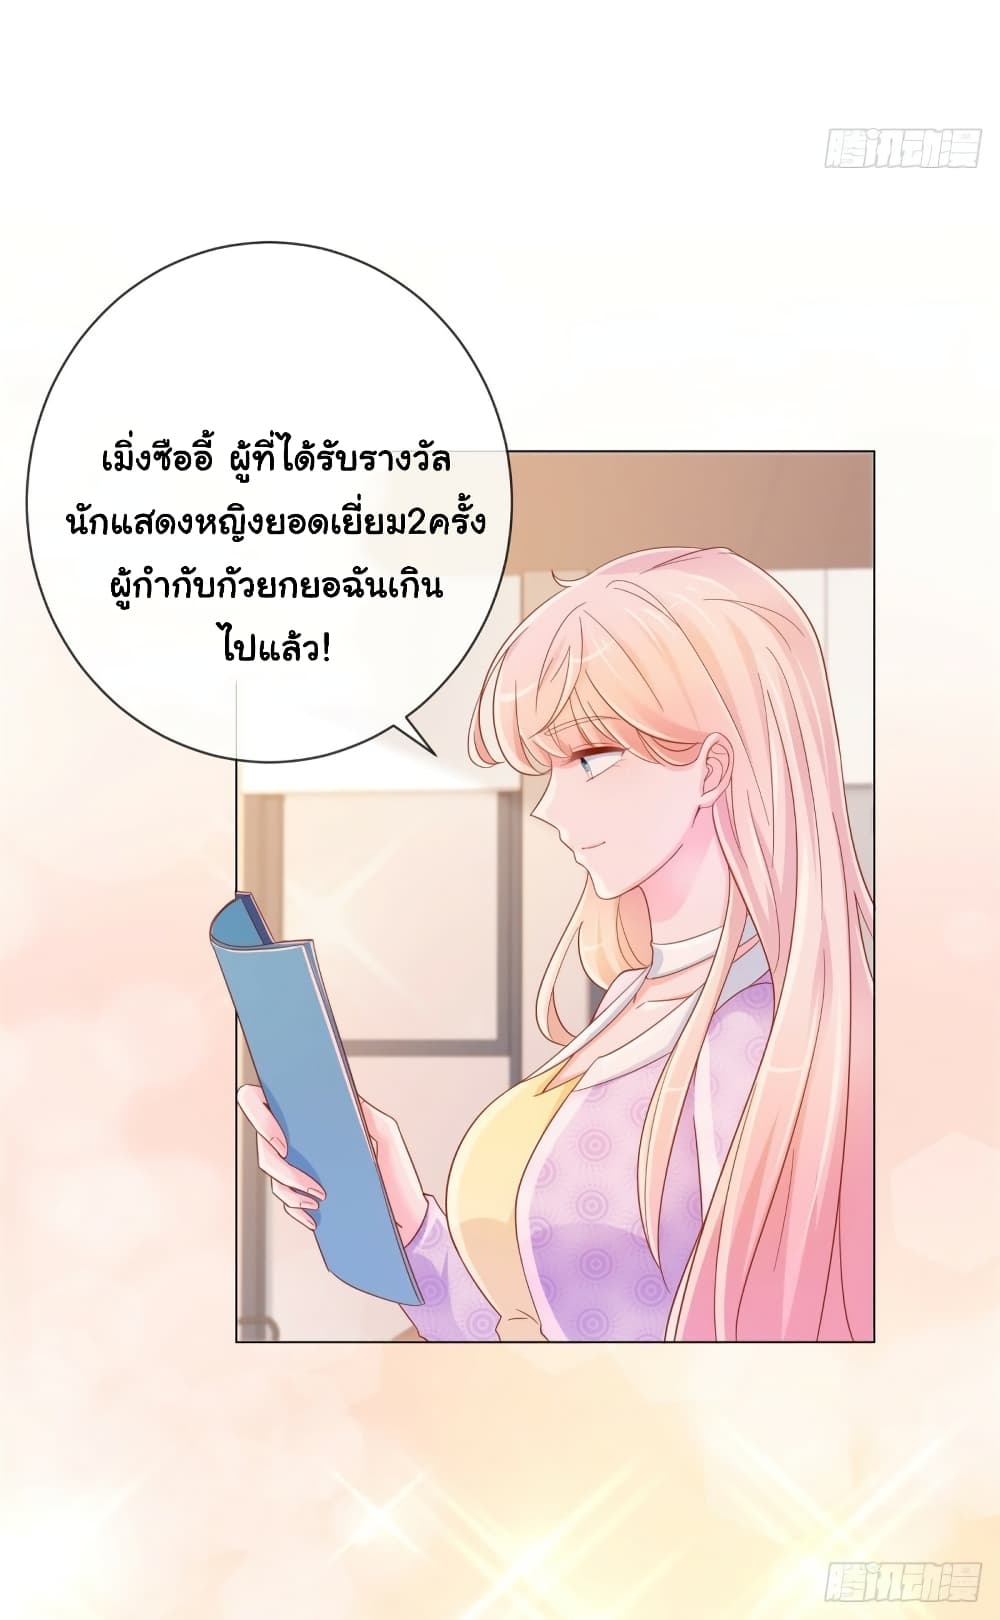 The Lovely Wife And Strange Marriage à¹à¸œà¸™à¸£à¸±à¸à¸¥à¸§à¸‡à¹ƒà¸ˆ 322 (12)